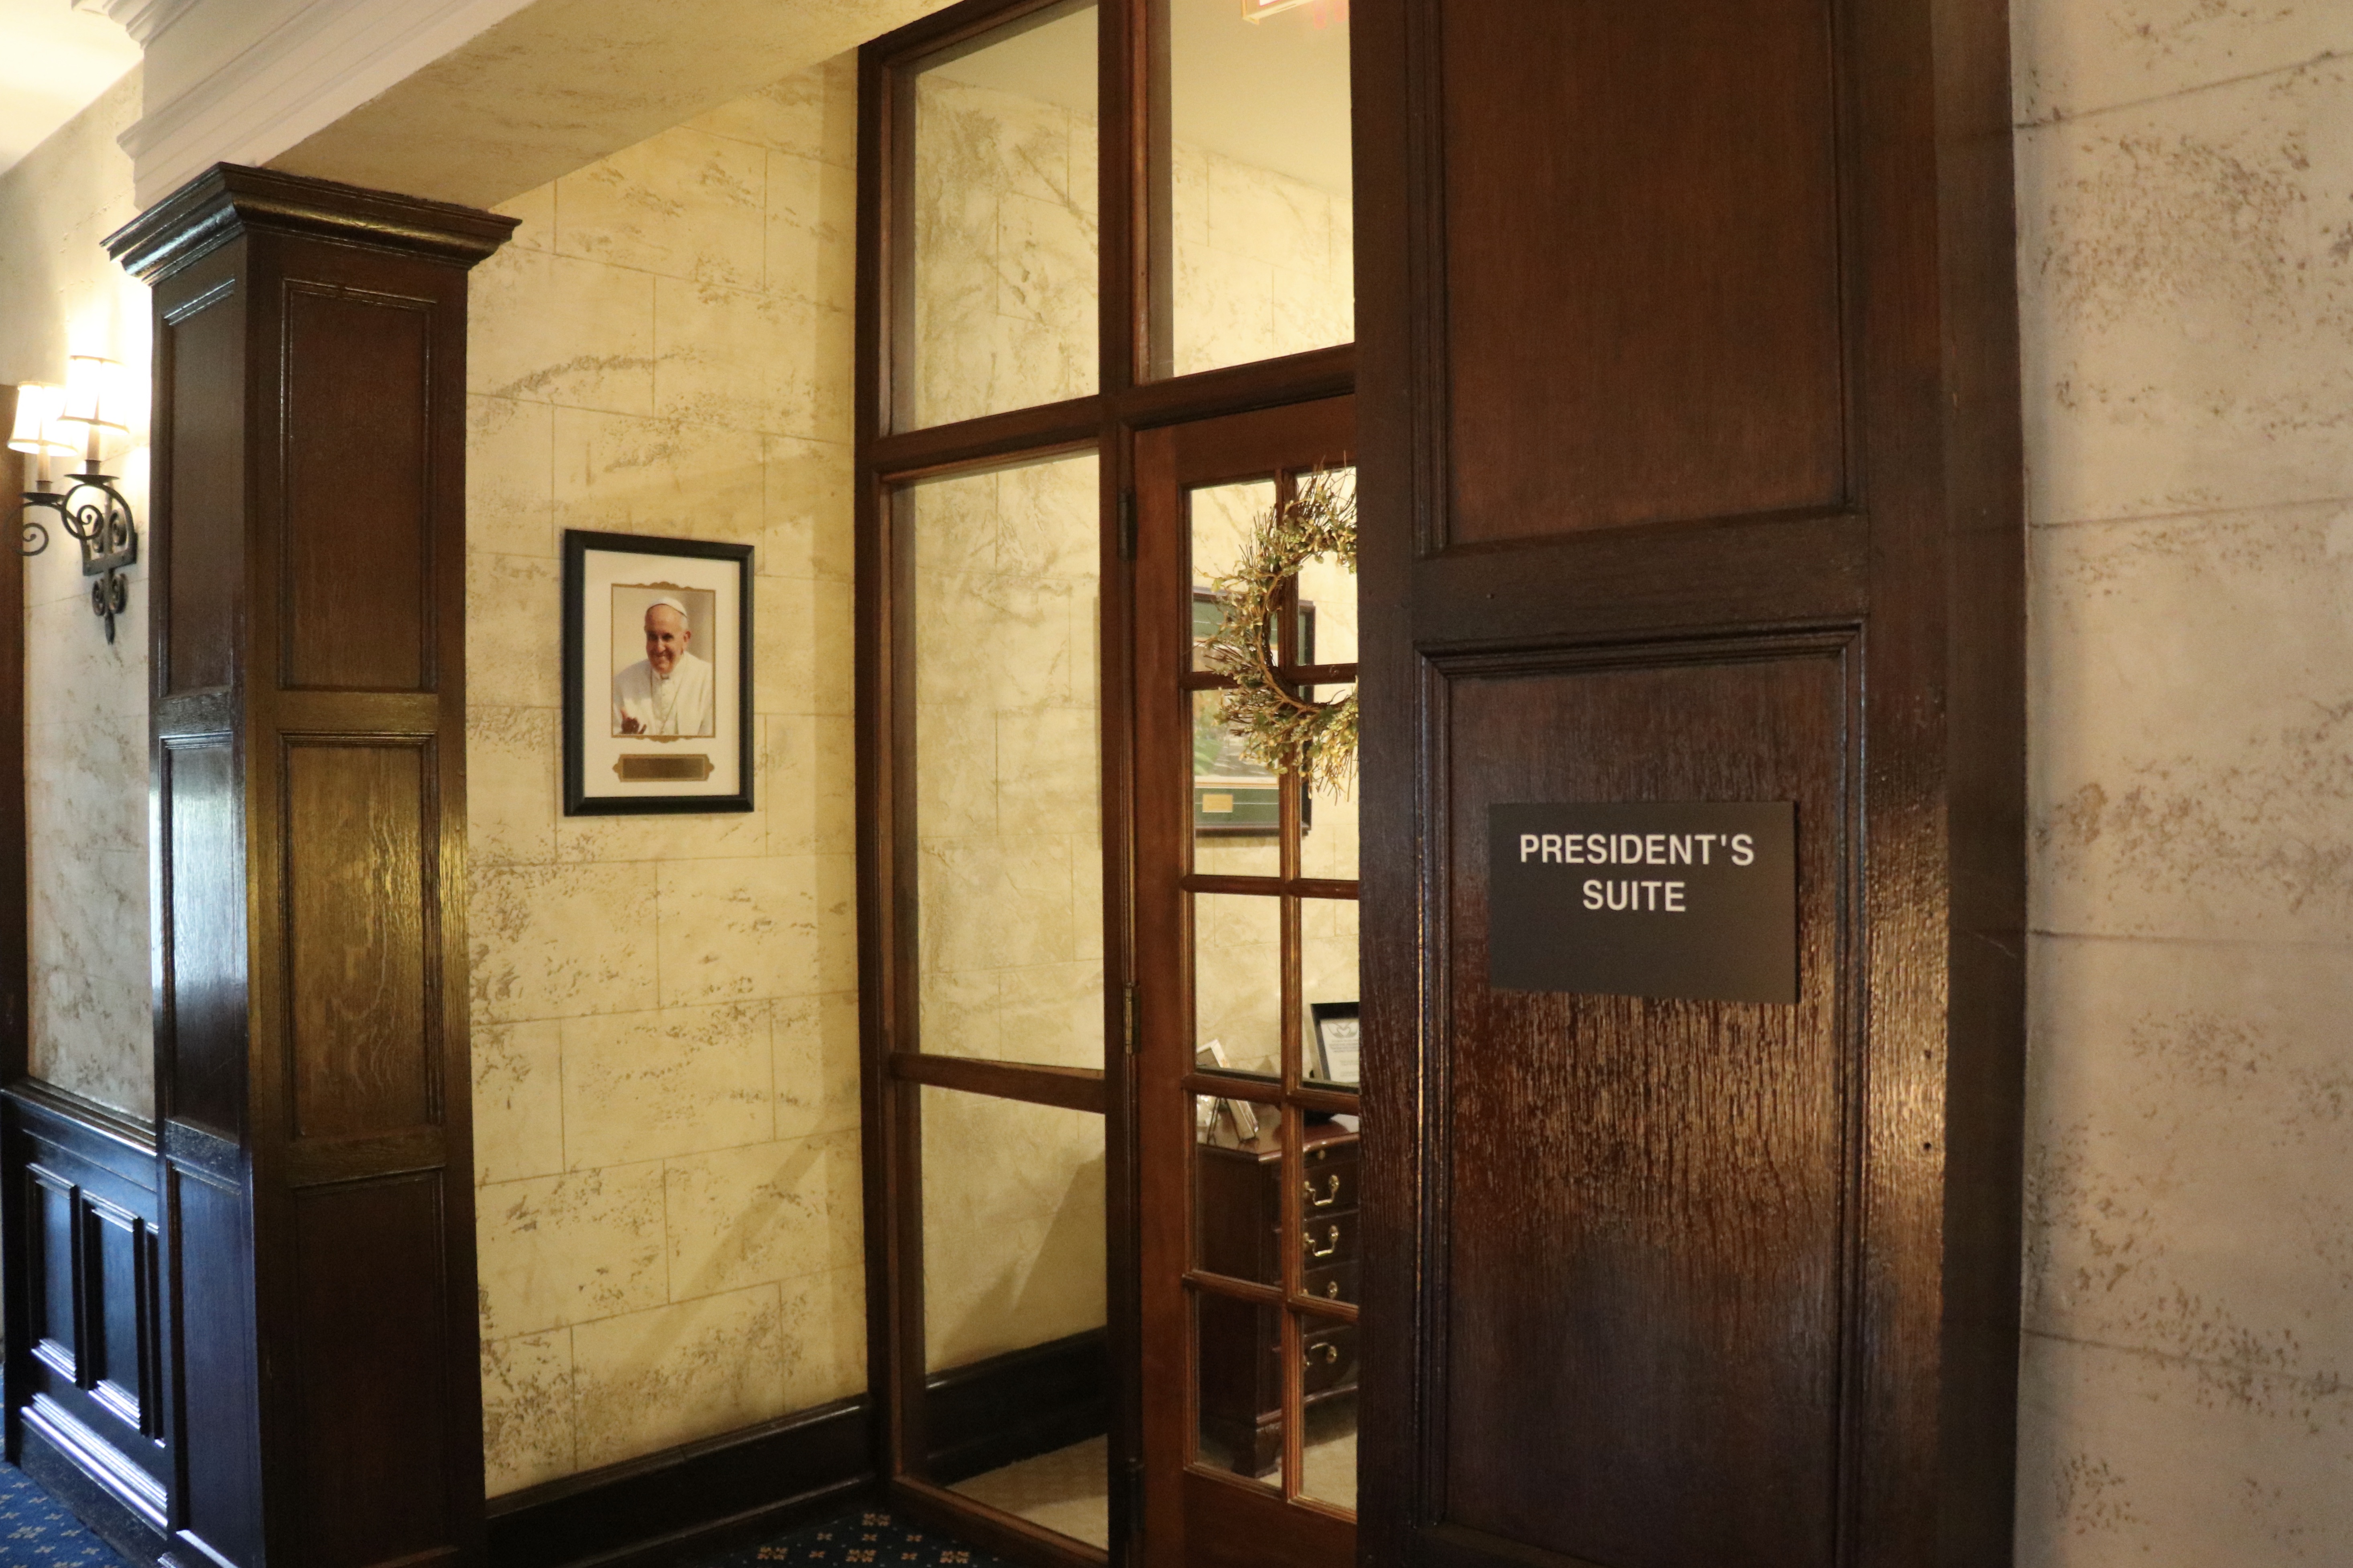 Cabrini's presidential suite located in the mansion. Glass door with brown trim and brown wood panels.